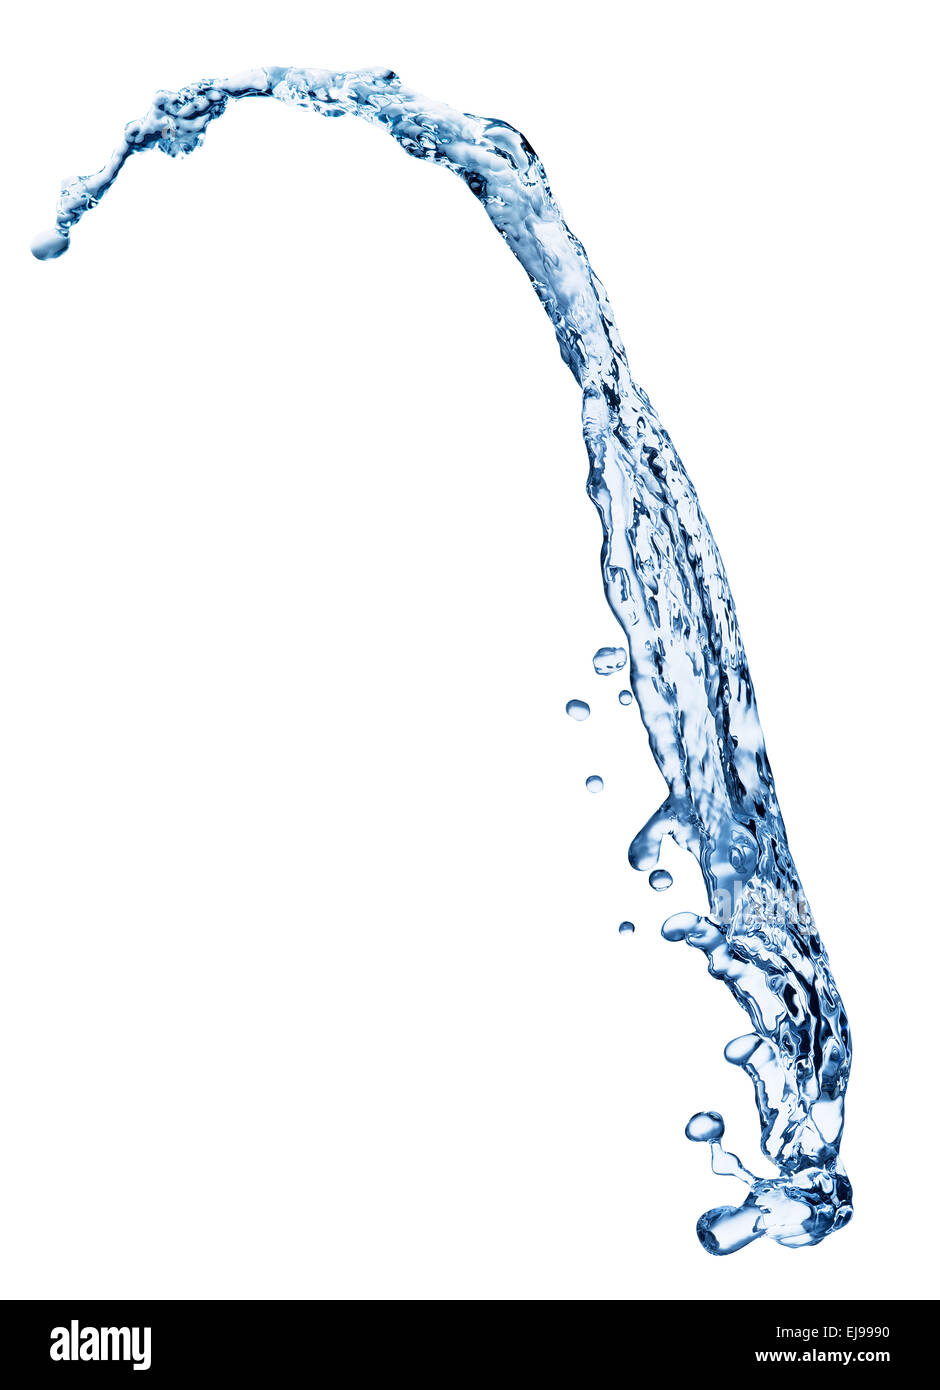 Splash of water. File contains clipping paths. Stock Photo